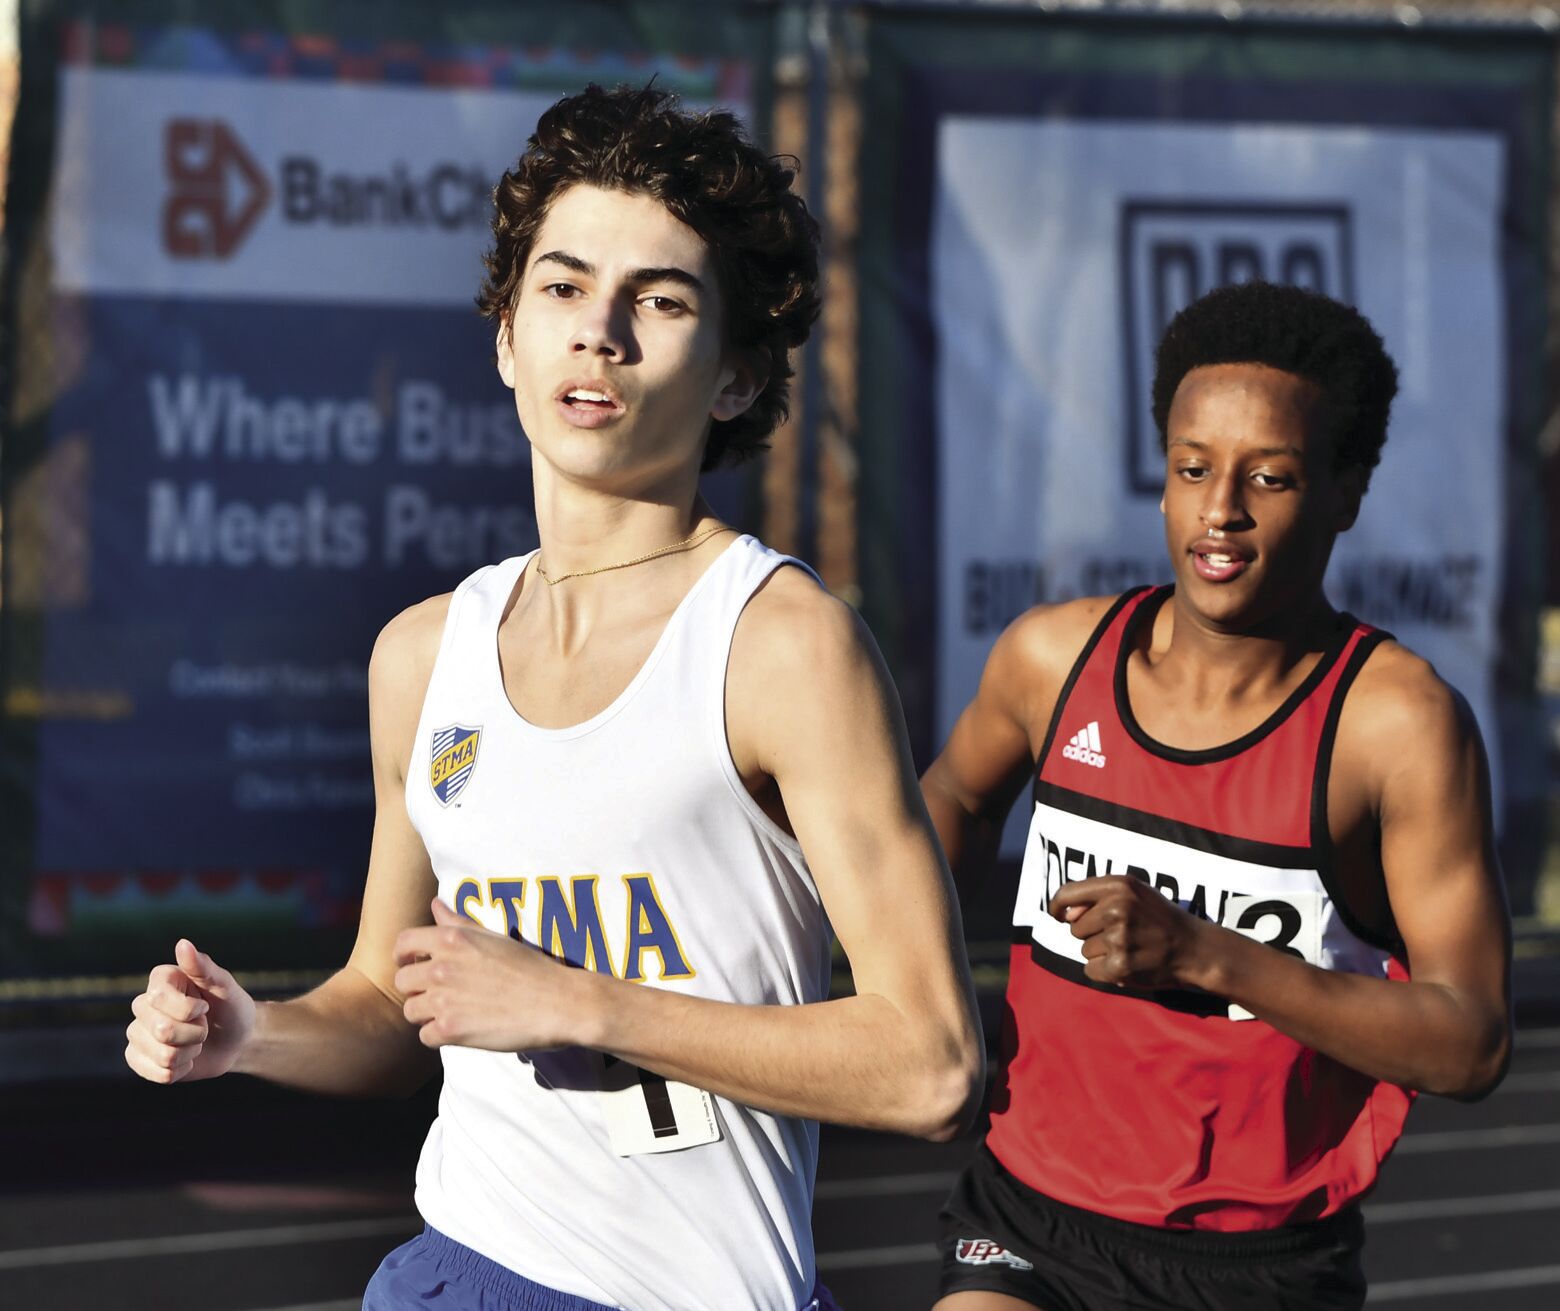 STMA starts track and field season with a bang